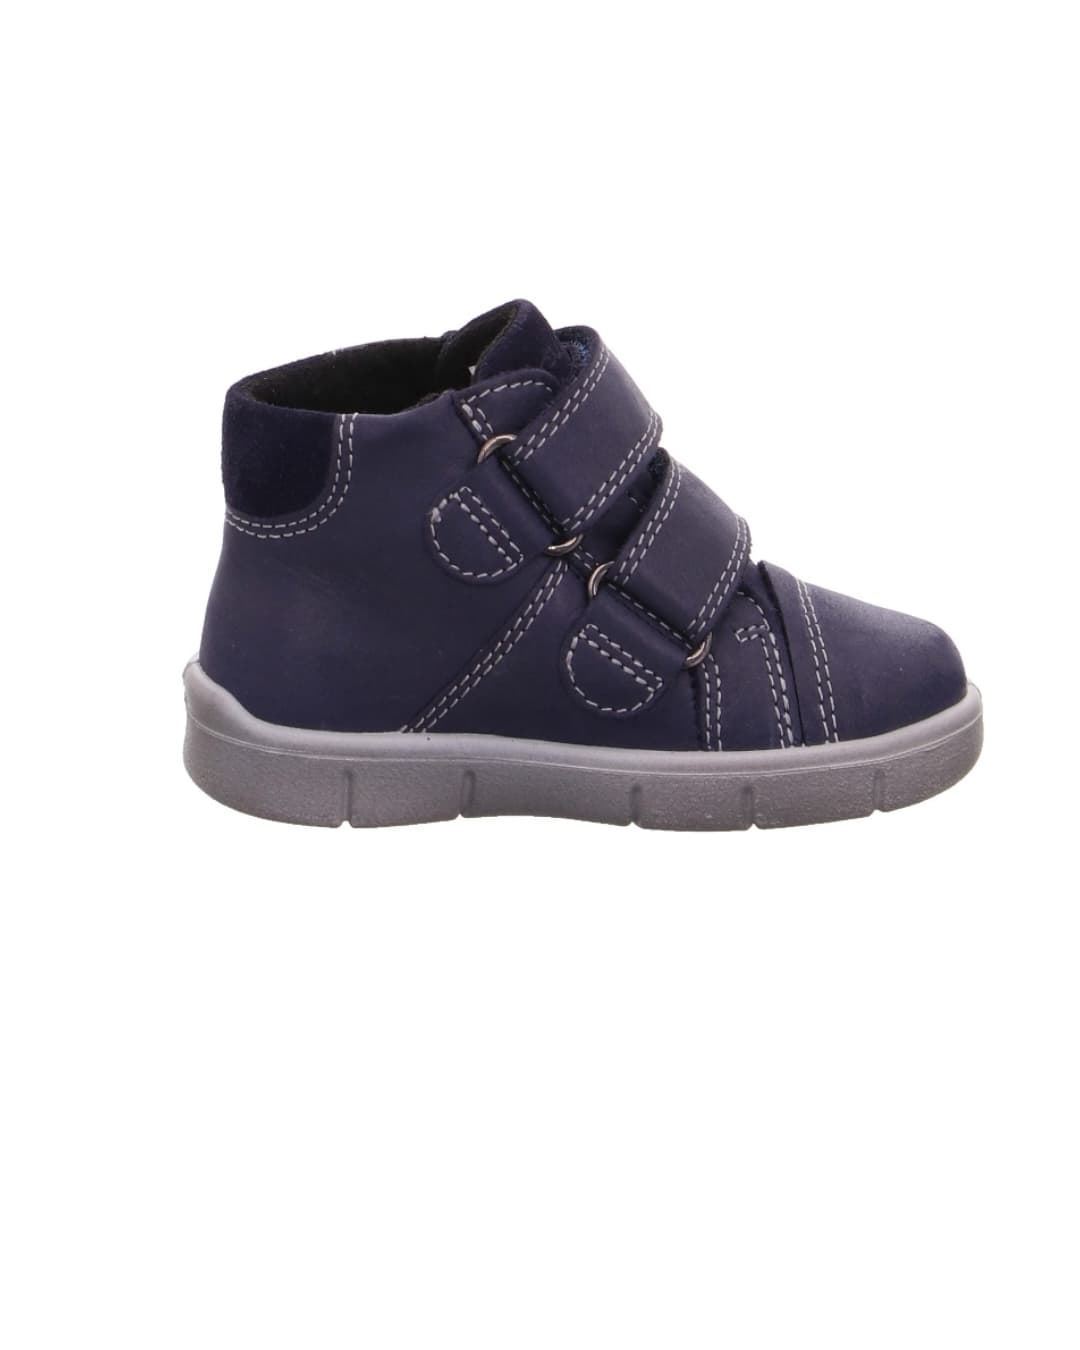 Superfit Gore-tex Baby Boots Navy Blue - Image 2